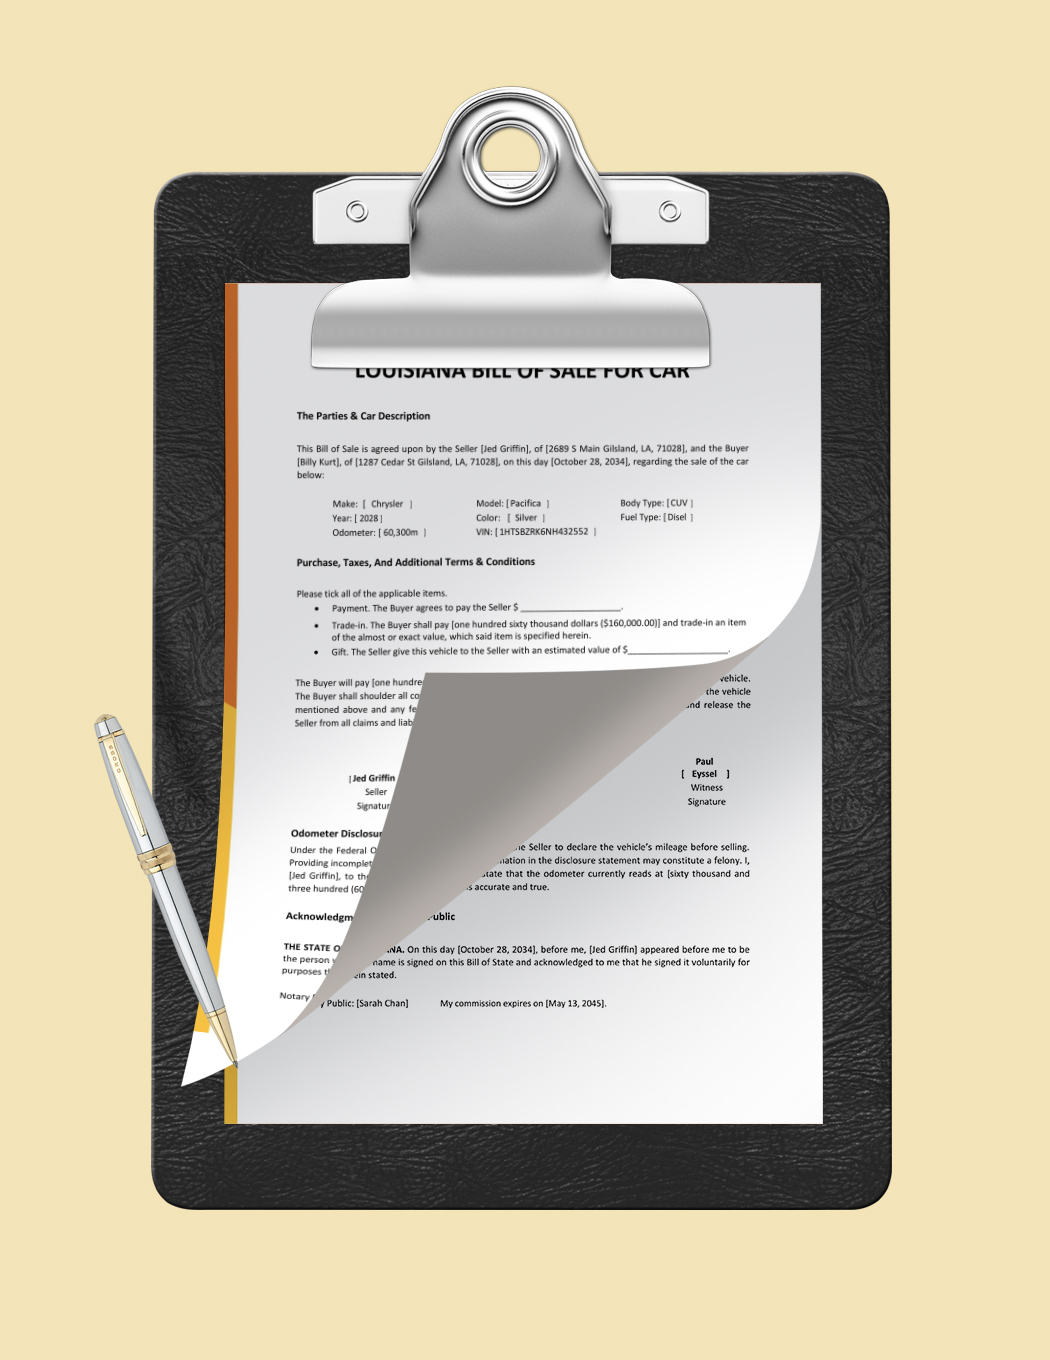 Louisiana Bill of Sale For Car Form Template